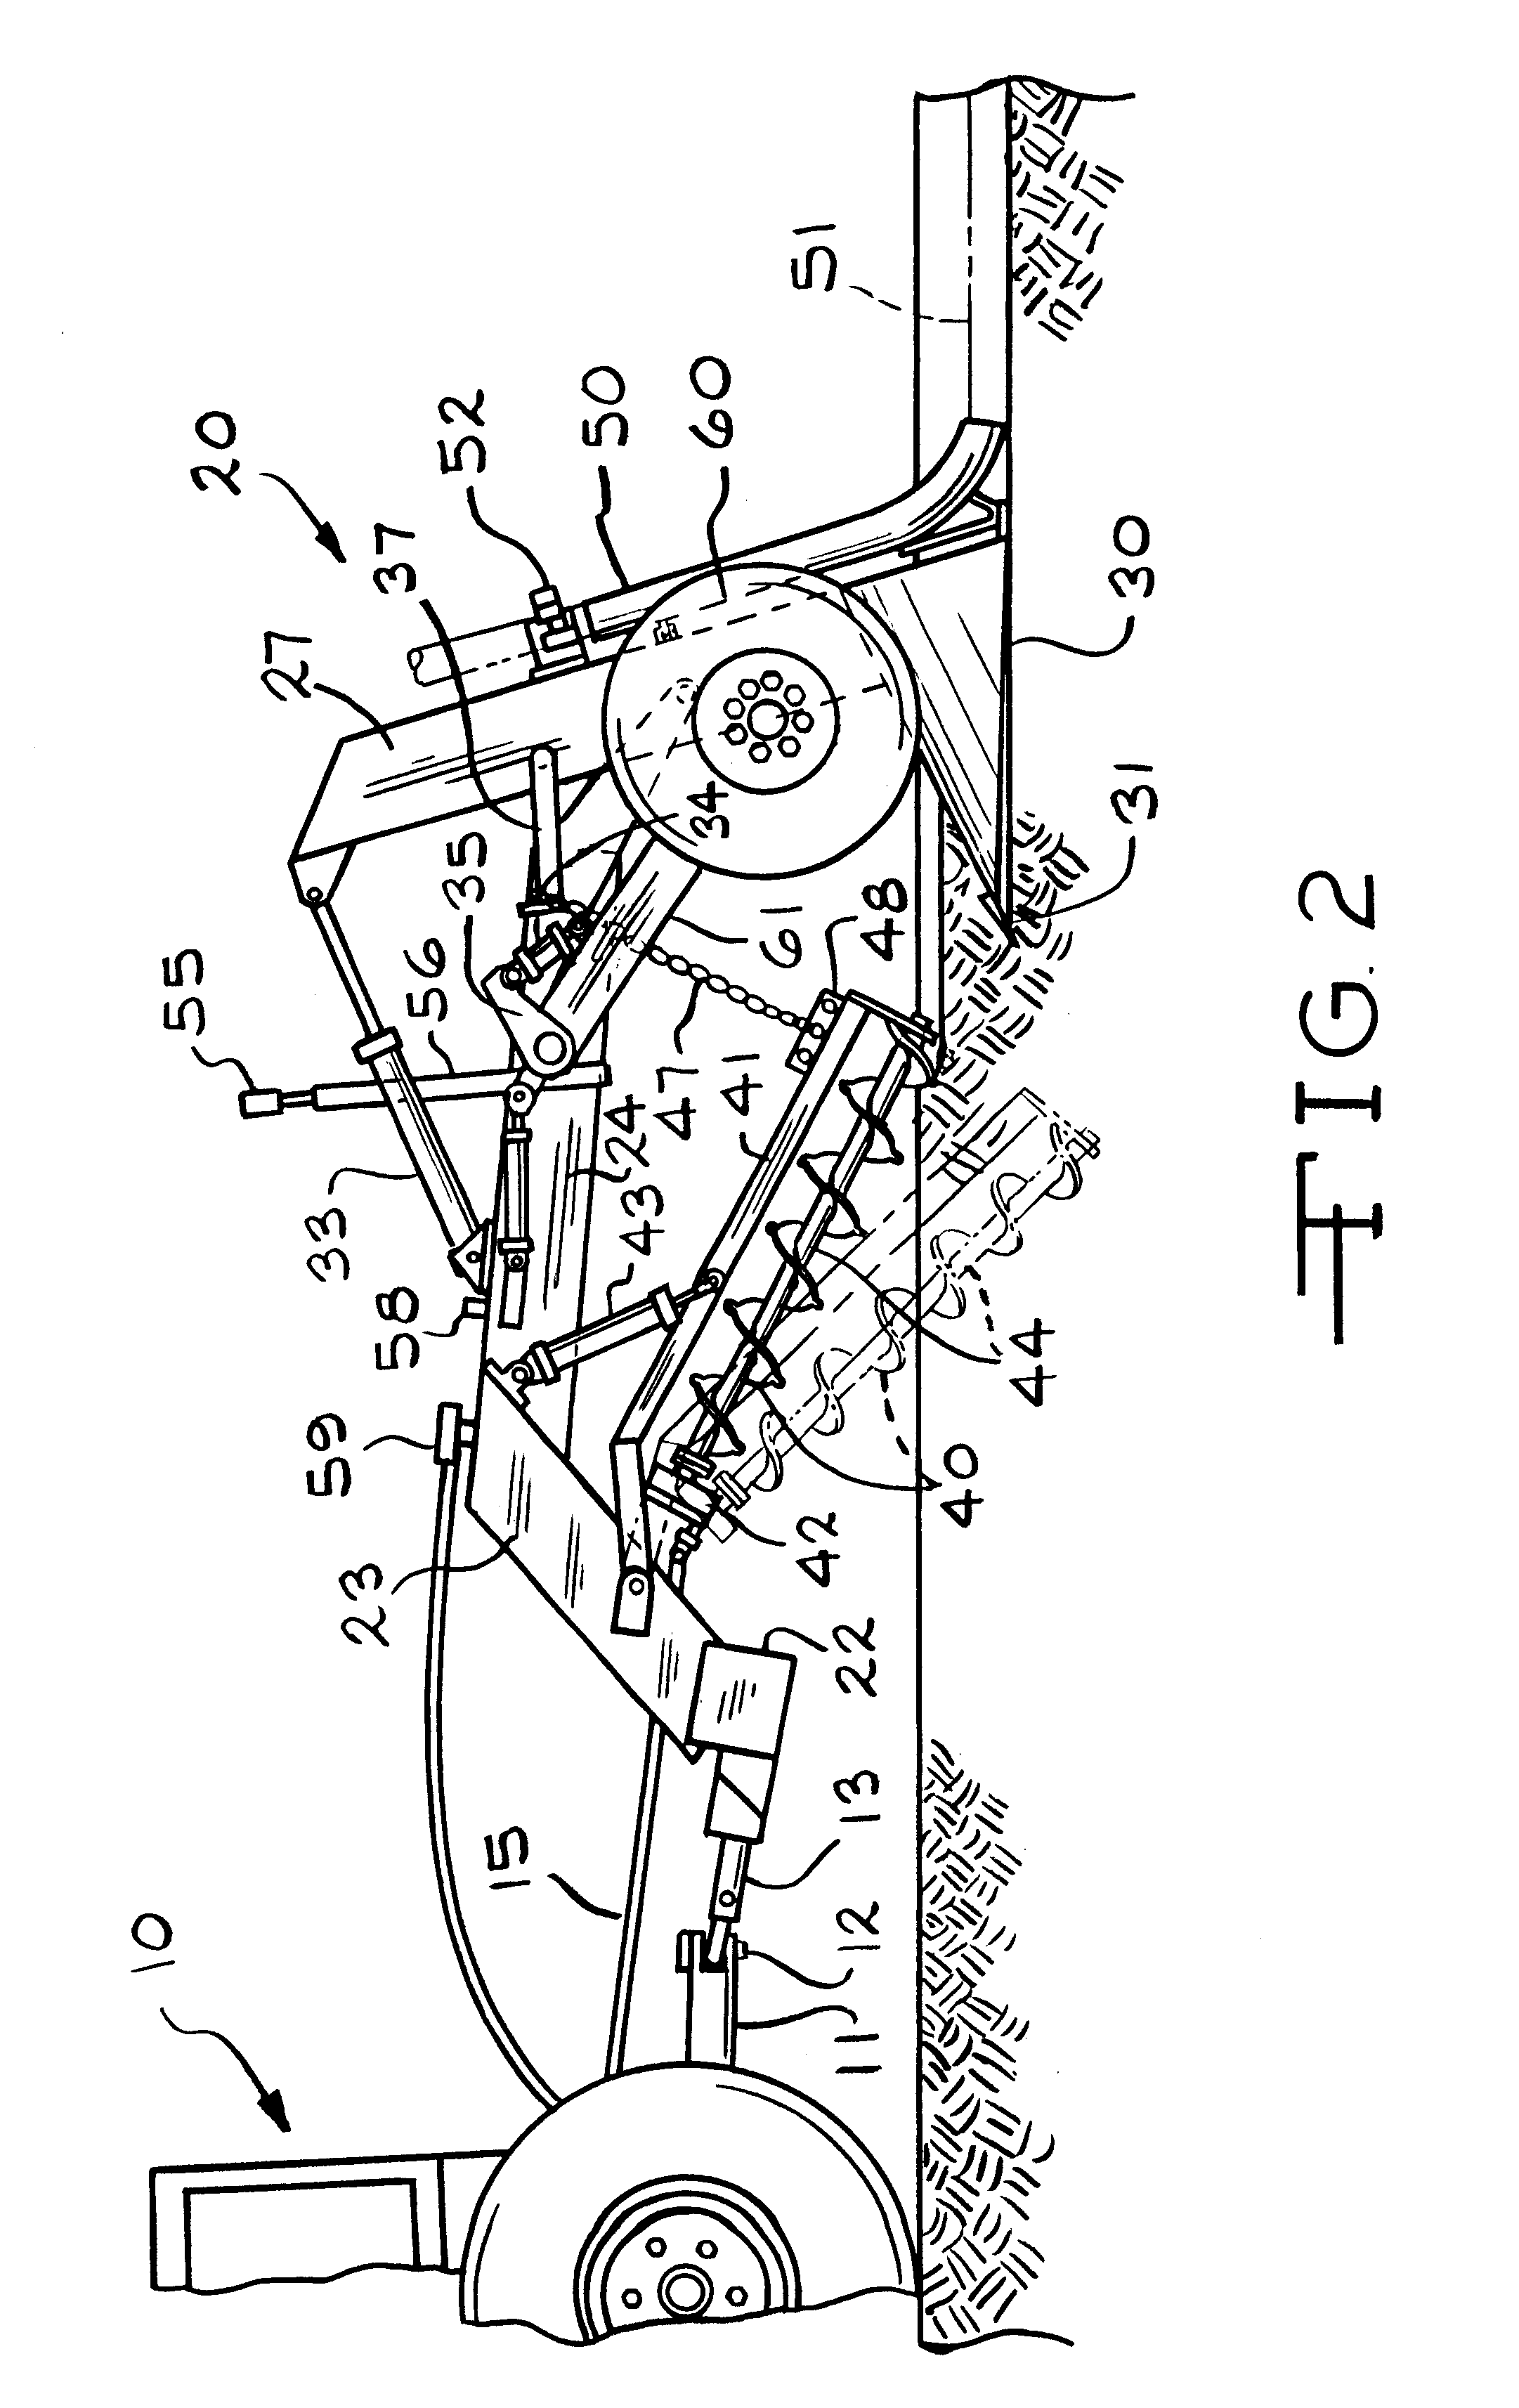 Trencher plow for laying pipe